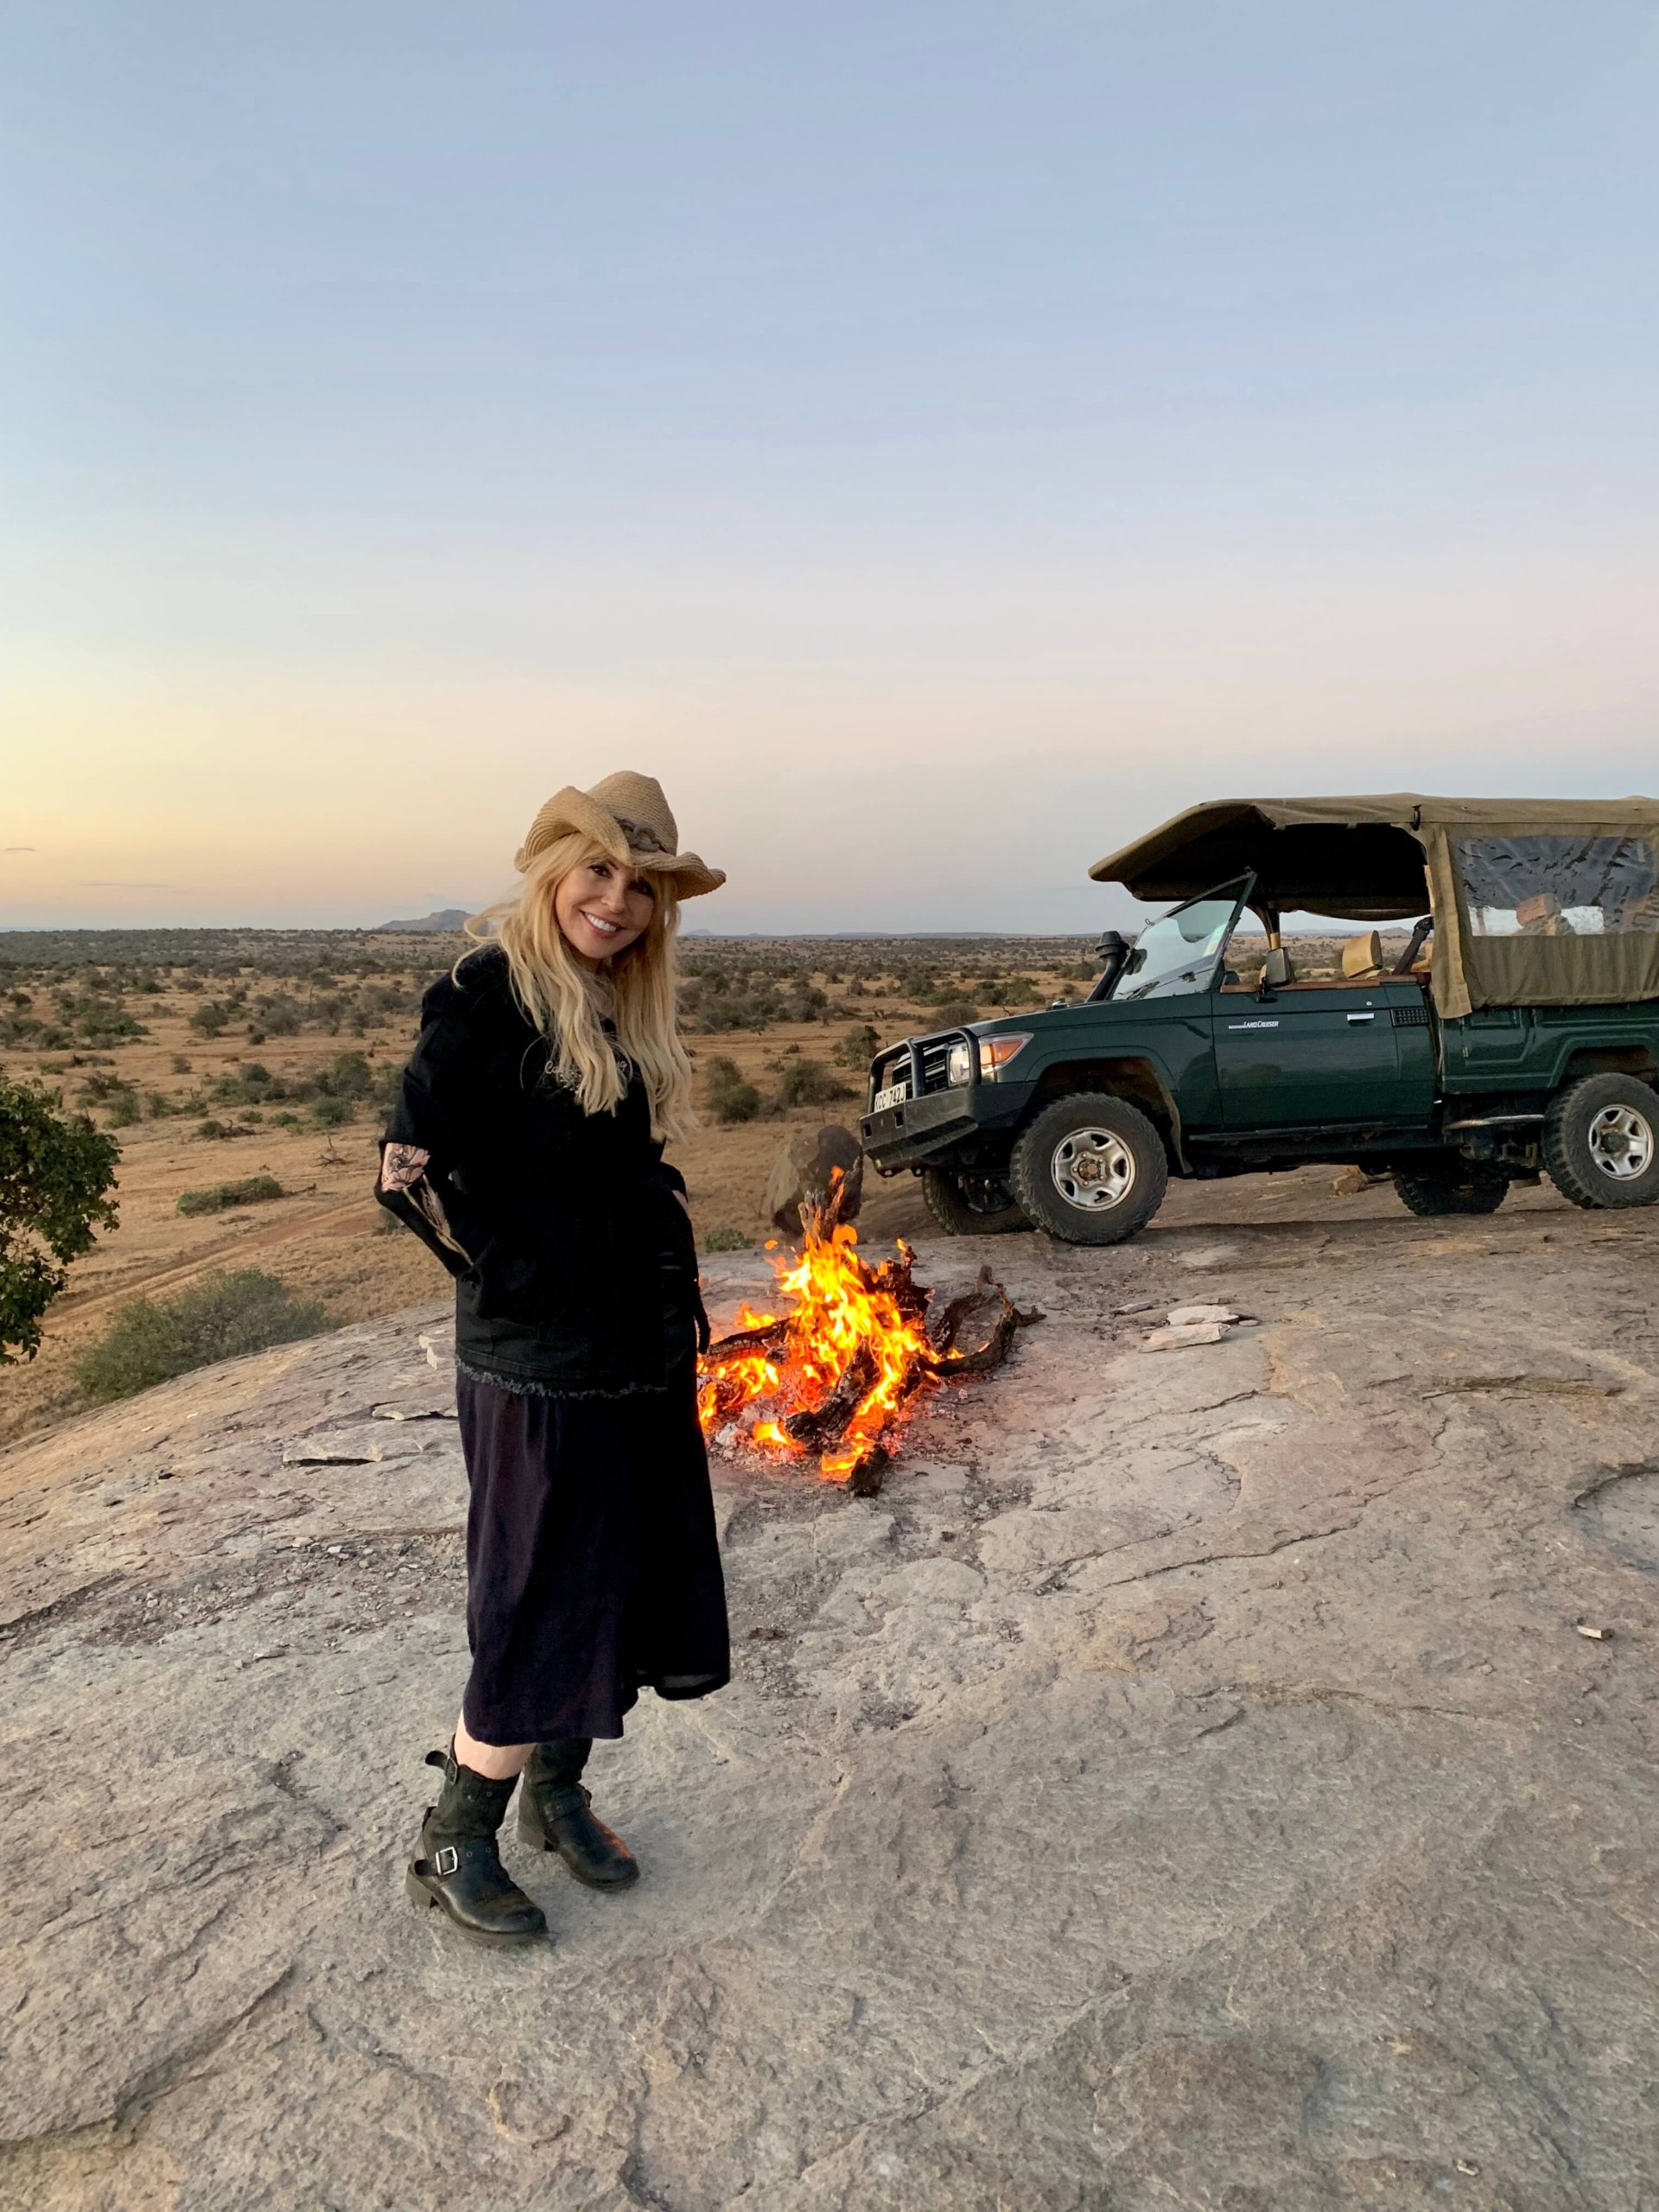 <b>HOLR MAGAZINE: </b>Mary Jean Tully Talks Traveling With a Purpose